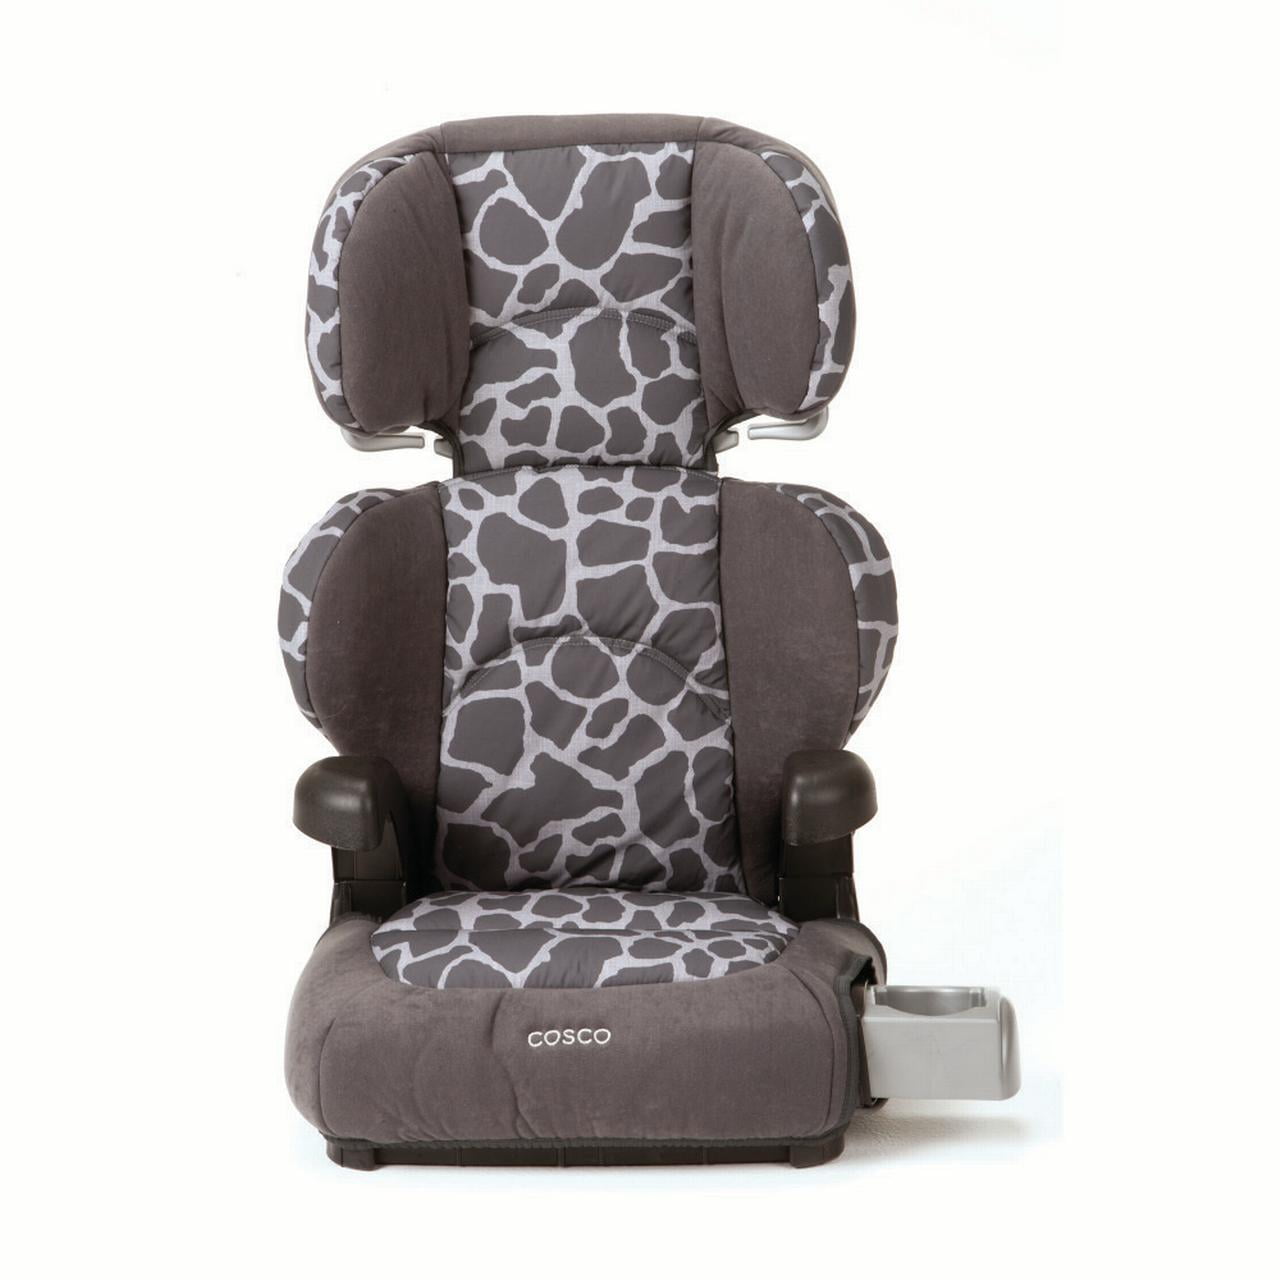 pronto booster car seat